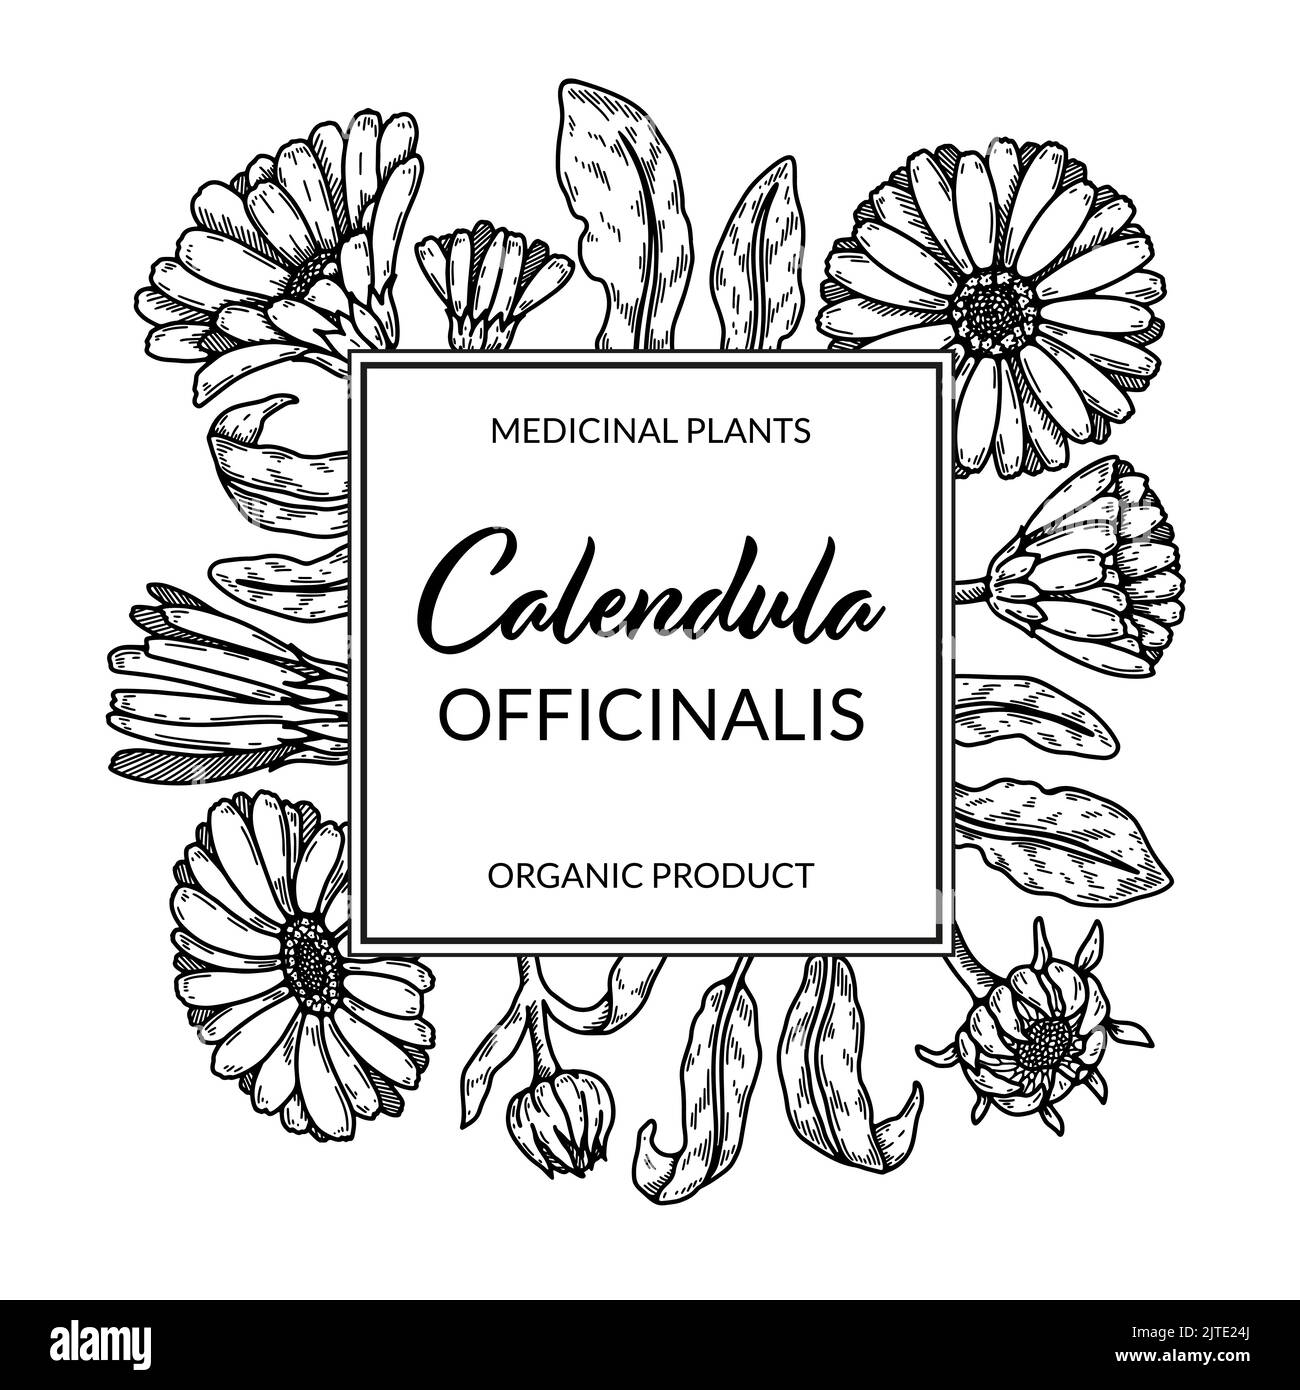 Calendula frame with hand drawn elements. Vector illustration in sketch style. Vintage packaging design Stock Vector